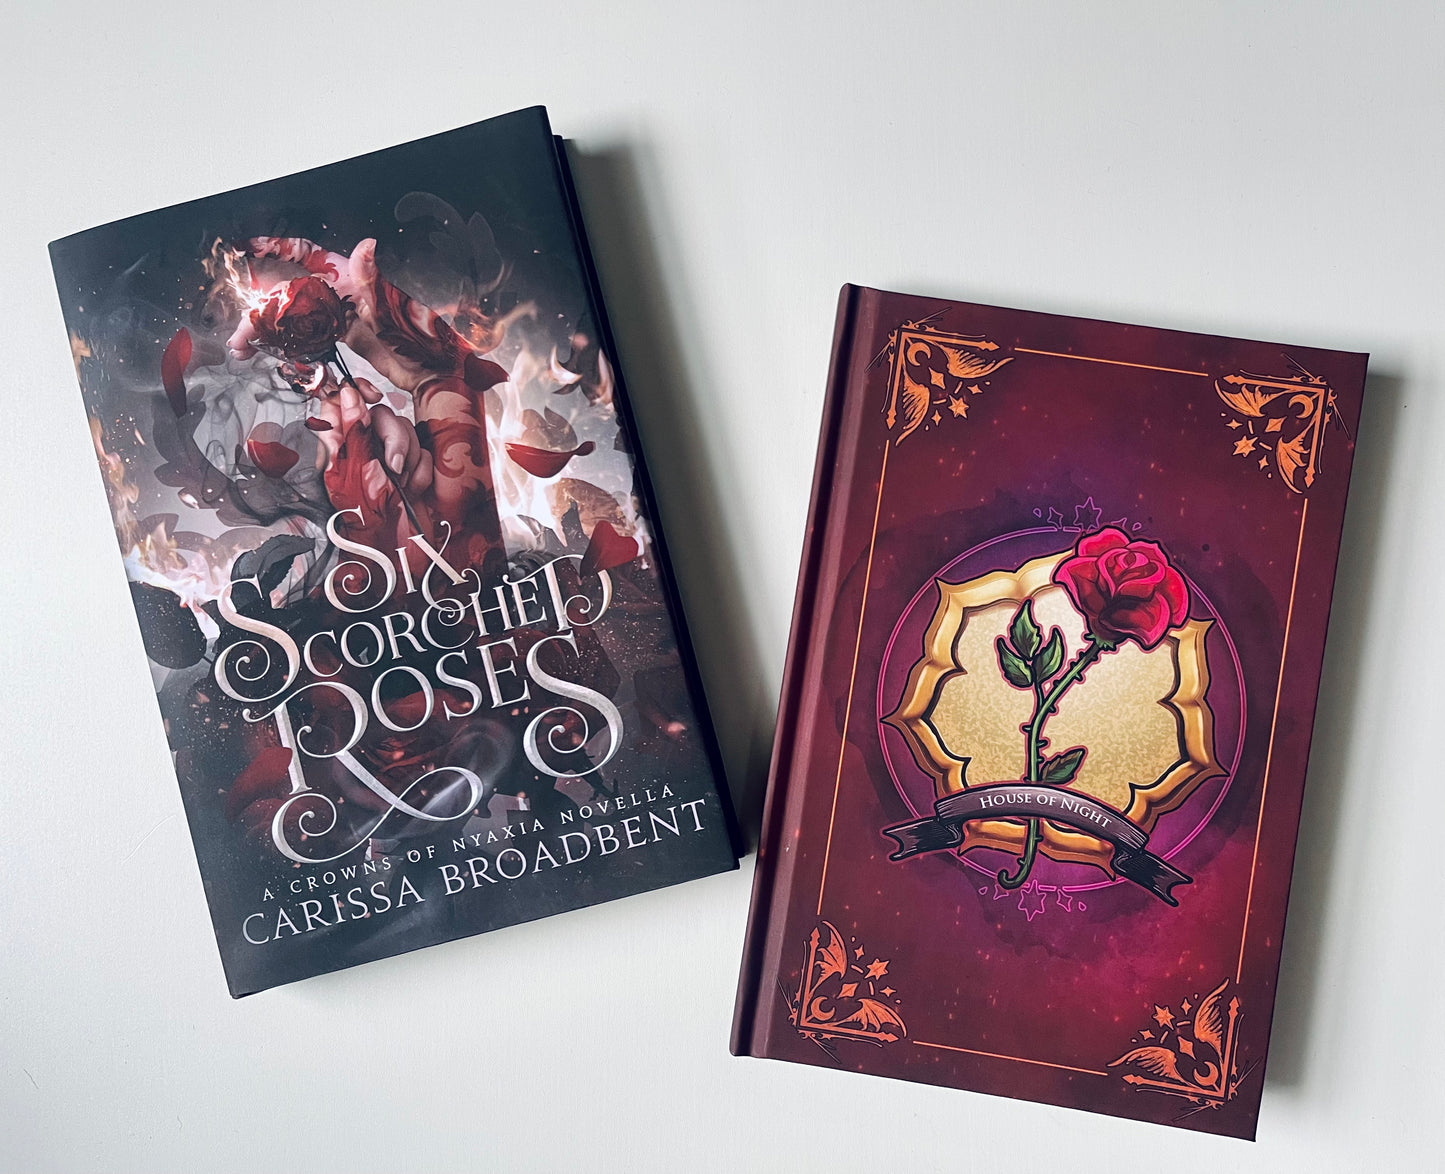 Crowns of Nyaxia series HARDCOVER by Carissa Broadbent